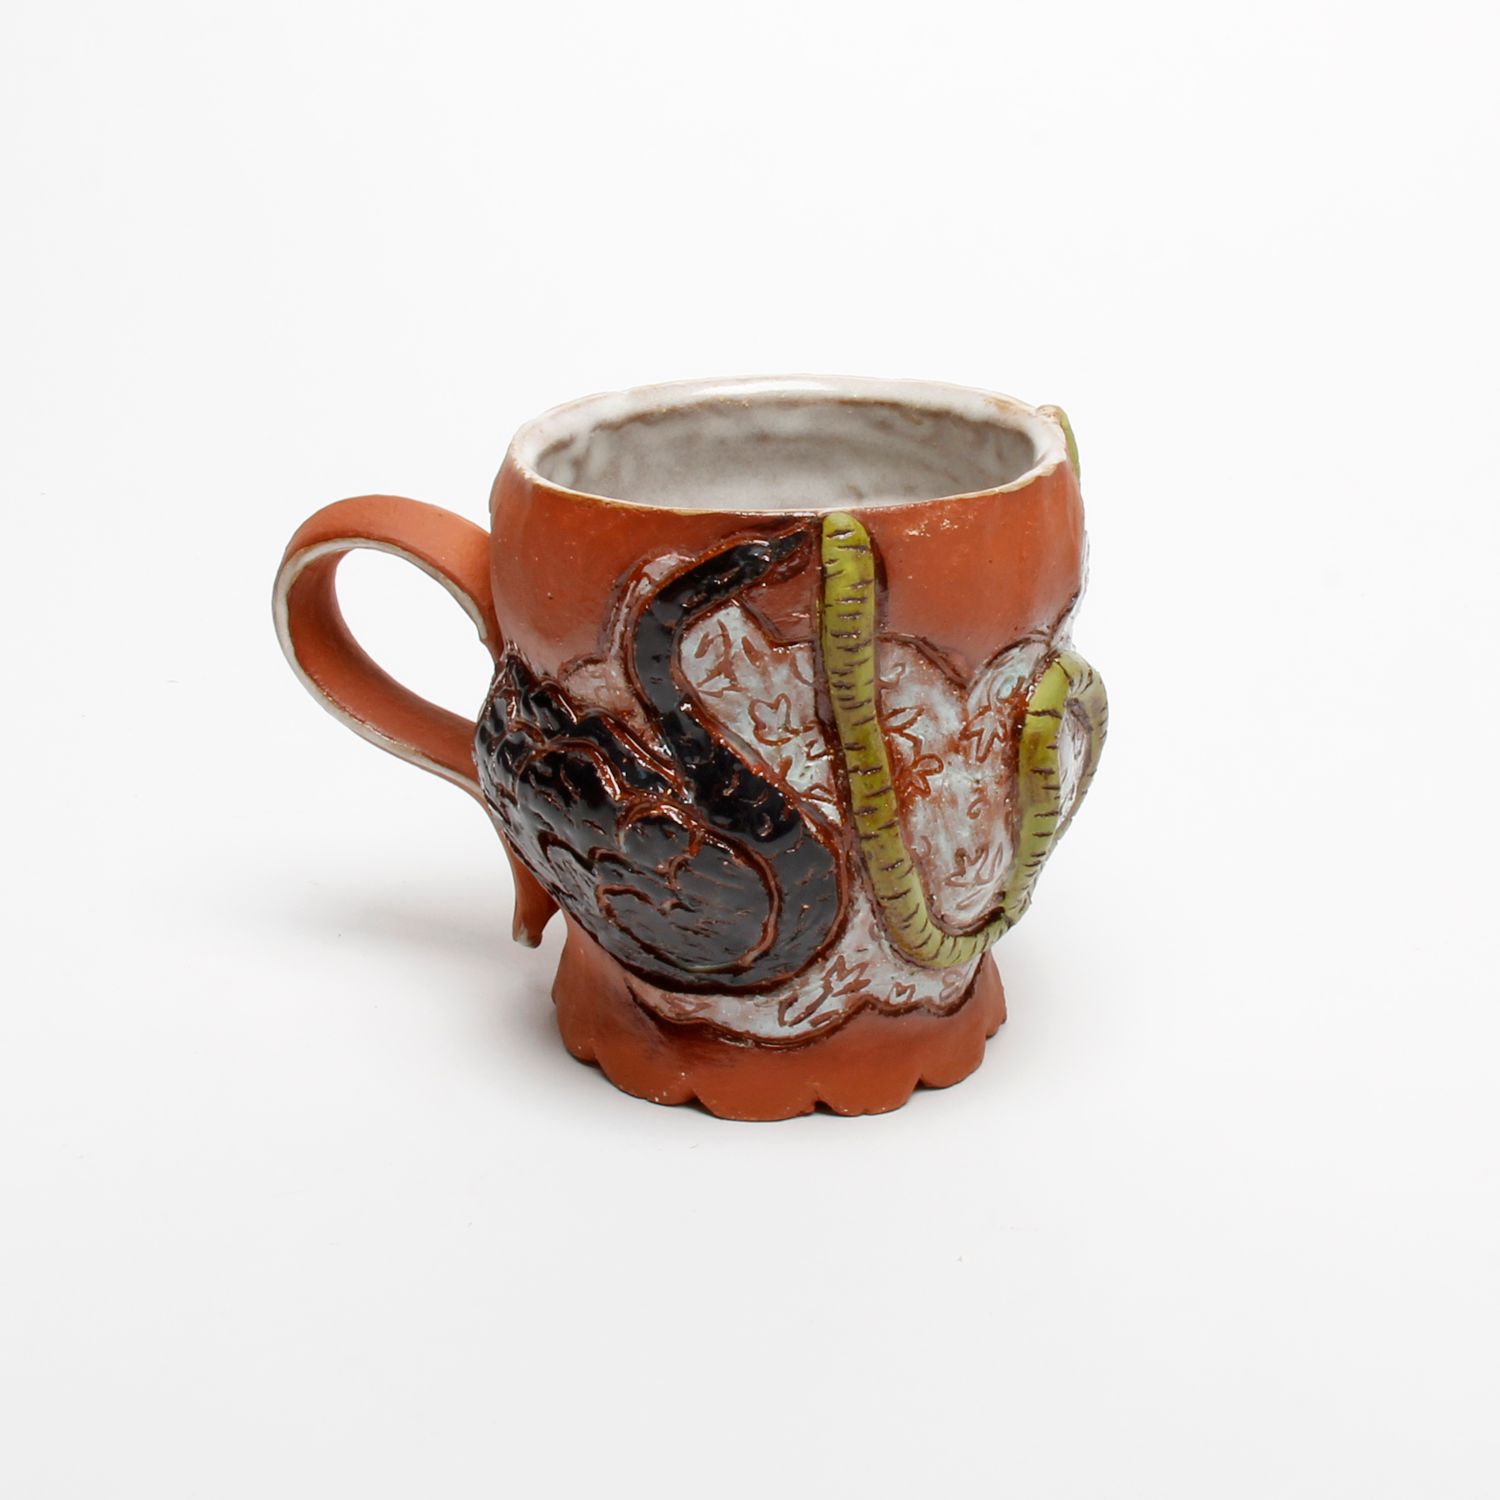 Zoë Pinnell: Tall Mug – Assorted Motifs Product Image 5 of 6